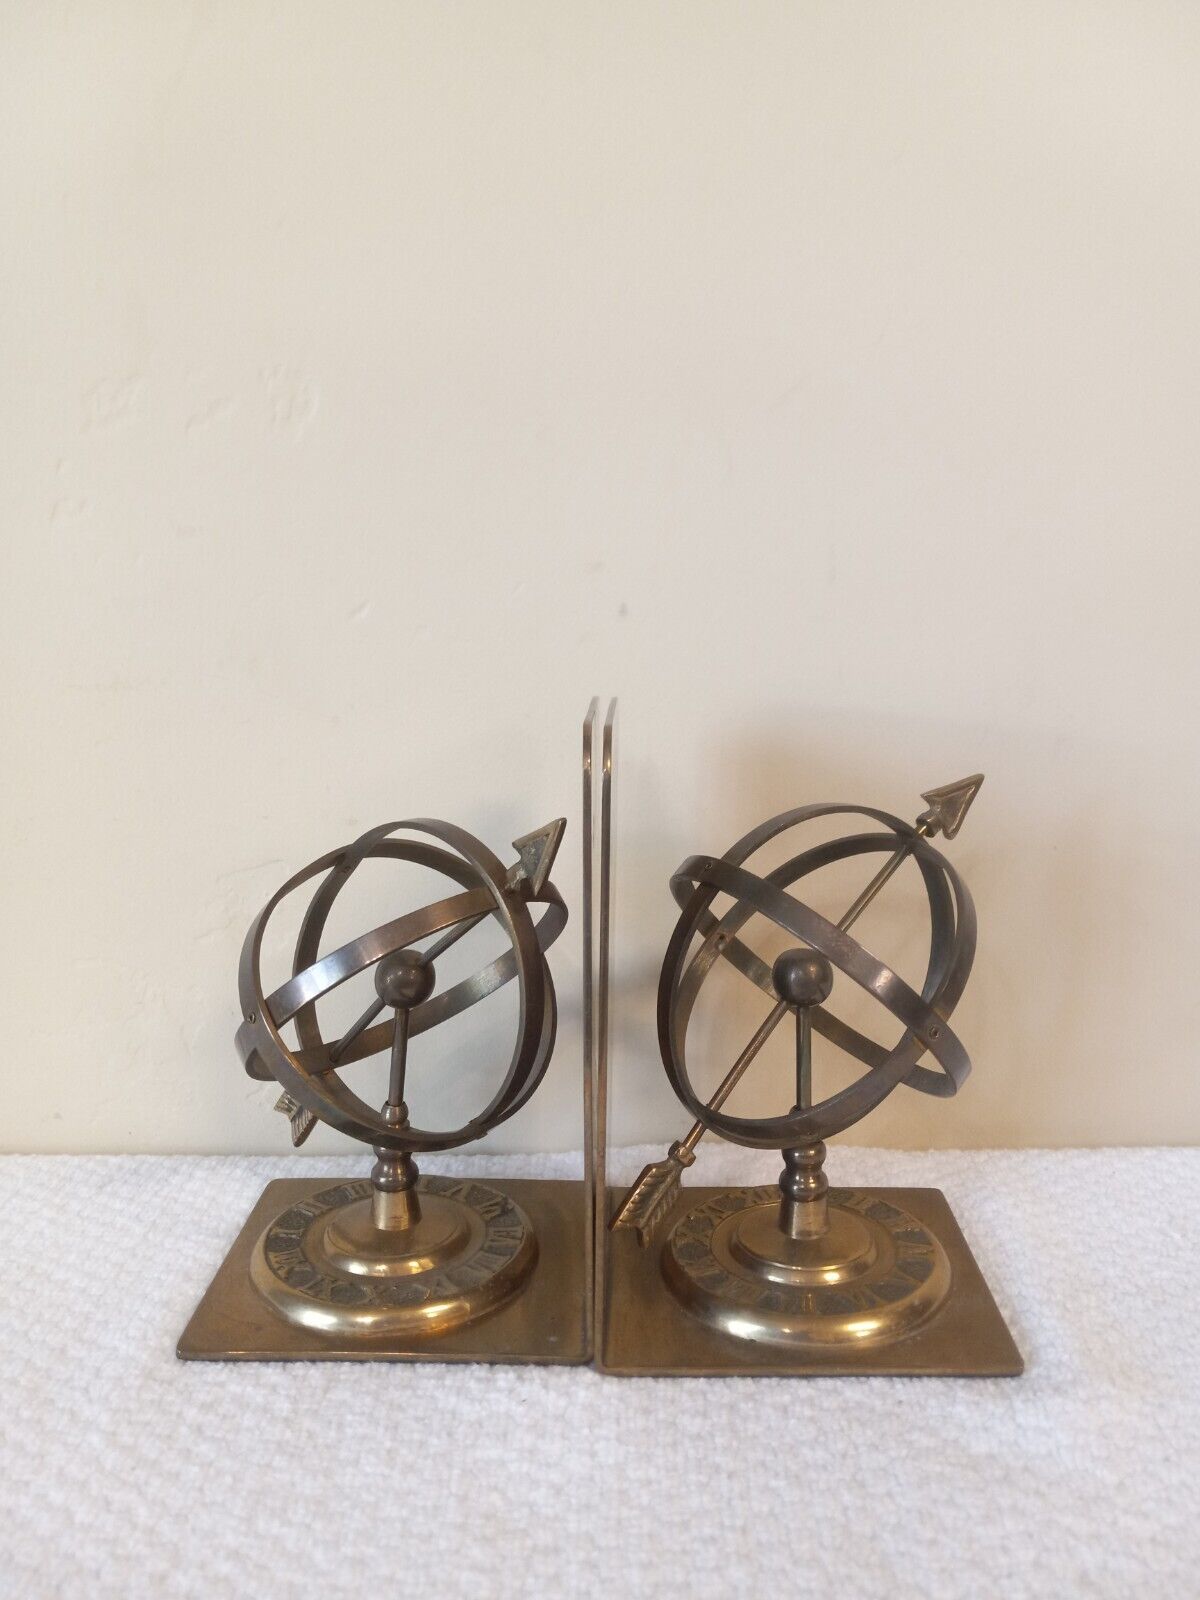 Vintage Solid Brass Armillary Sphere Sundial Bookends